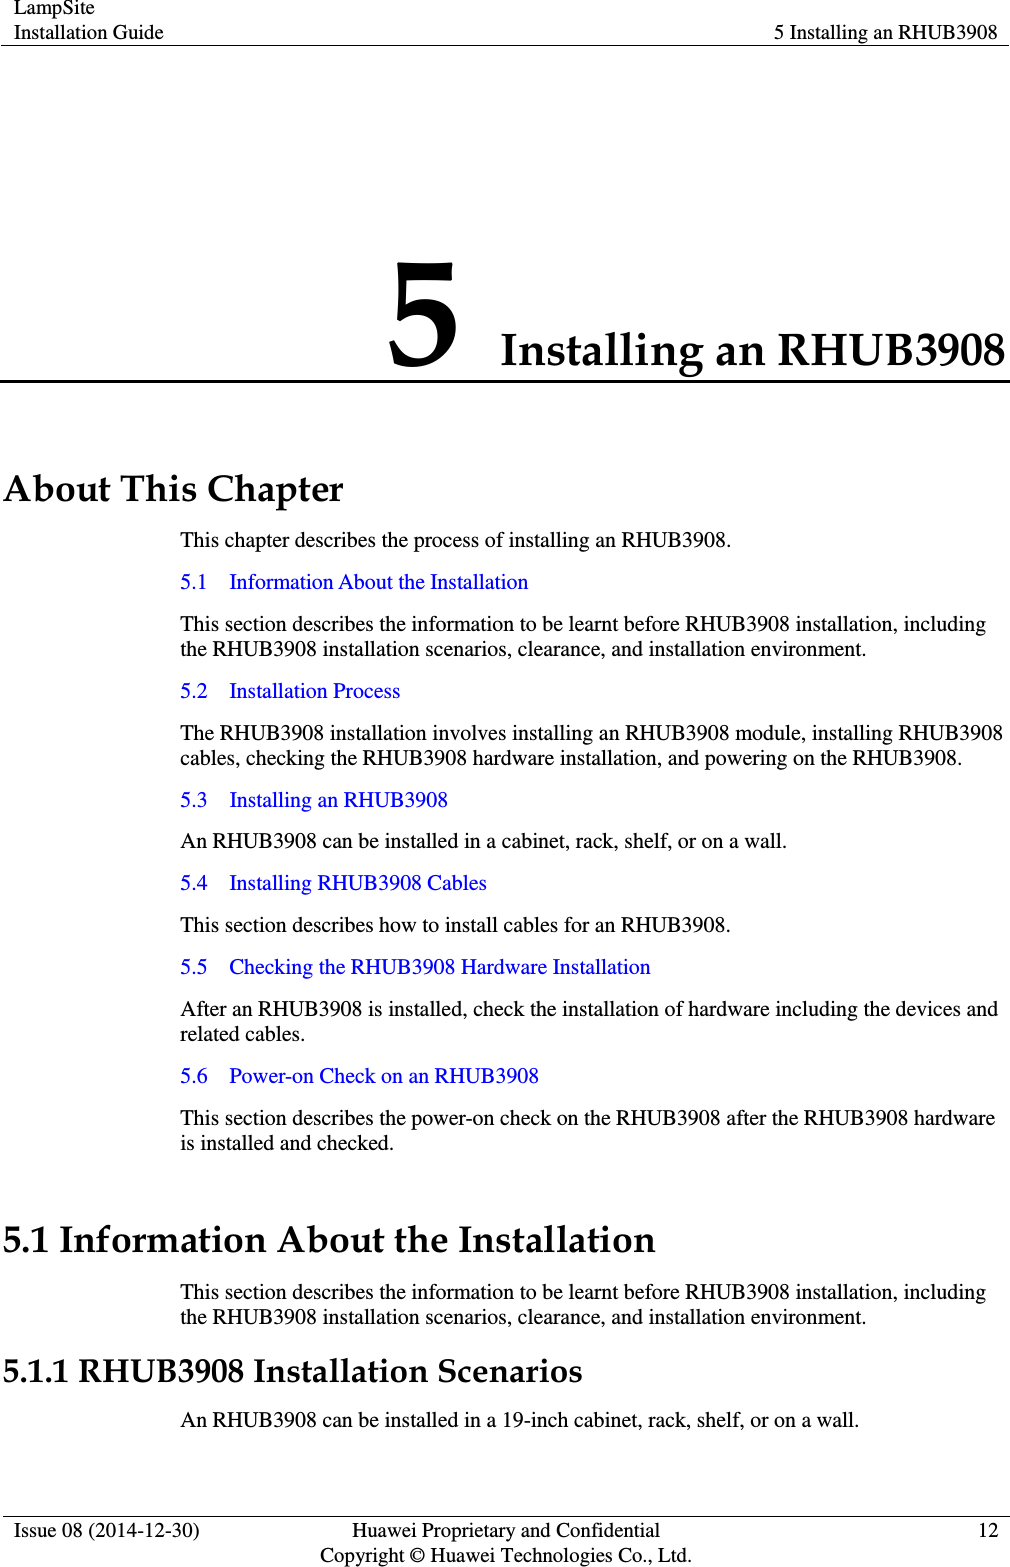 LampSite Installation Guide 5 Installing an RHUB3908  Issue 08 (2014-12-30) Huawei Proprietary and Confidential                                     Copyright © Huawei Technologies Co., Ltd. 12  5 Installing an RHUB3908 About This Chapter This chapter describes the process of installing an RHUB3908.   5.1    Information About the Installation This section describes the information to be learnt before RHUB3908 installation, including the RHUB3908 installation scenarios, clearance, and installation environment.   5.2    Installation Process The RHUB3908 installation involves installing an RHUB3908 module, installing RHUB3908 cables, checking the RHUB3908 hardware installation, and powering on the RHUB3908.     5.3    Installing an RHUB3908 An RHUB3908 can be installed in a cabinet, rack, shelf, or on a wall.   5.4    Installing RHUB3908 Cables This section describes how to install cables for an RHUB3908.   5.5    Checking the RHUB3908 Hardware Installation After an RHUB3908 is installed, check the installation of hardware including the devices and related cables.   5.6    Power-on Check on an RHUB3908 This section describes the power-on check on the RHUB3908 after the RHUB3908 hardware is installed and checked.   5.1 Information About the Installation This section describes the information to be learnt before RHUB3908 installation, including the RHUB3908 installation scenarios, clearance, and installation environment.   5.1.1 RHUB3908 Installation Scenarios An RHUB3908 can be installed in a 19-inch cabinet, rack, shelf, or on a wall.   